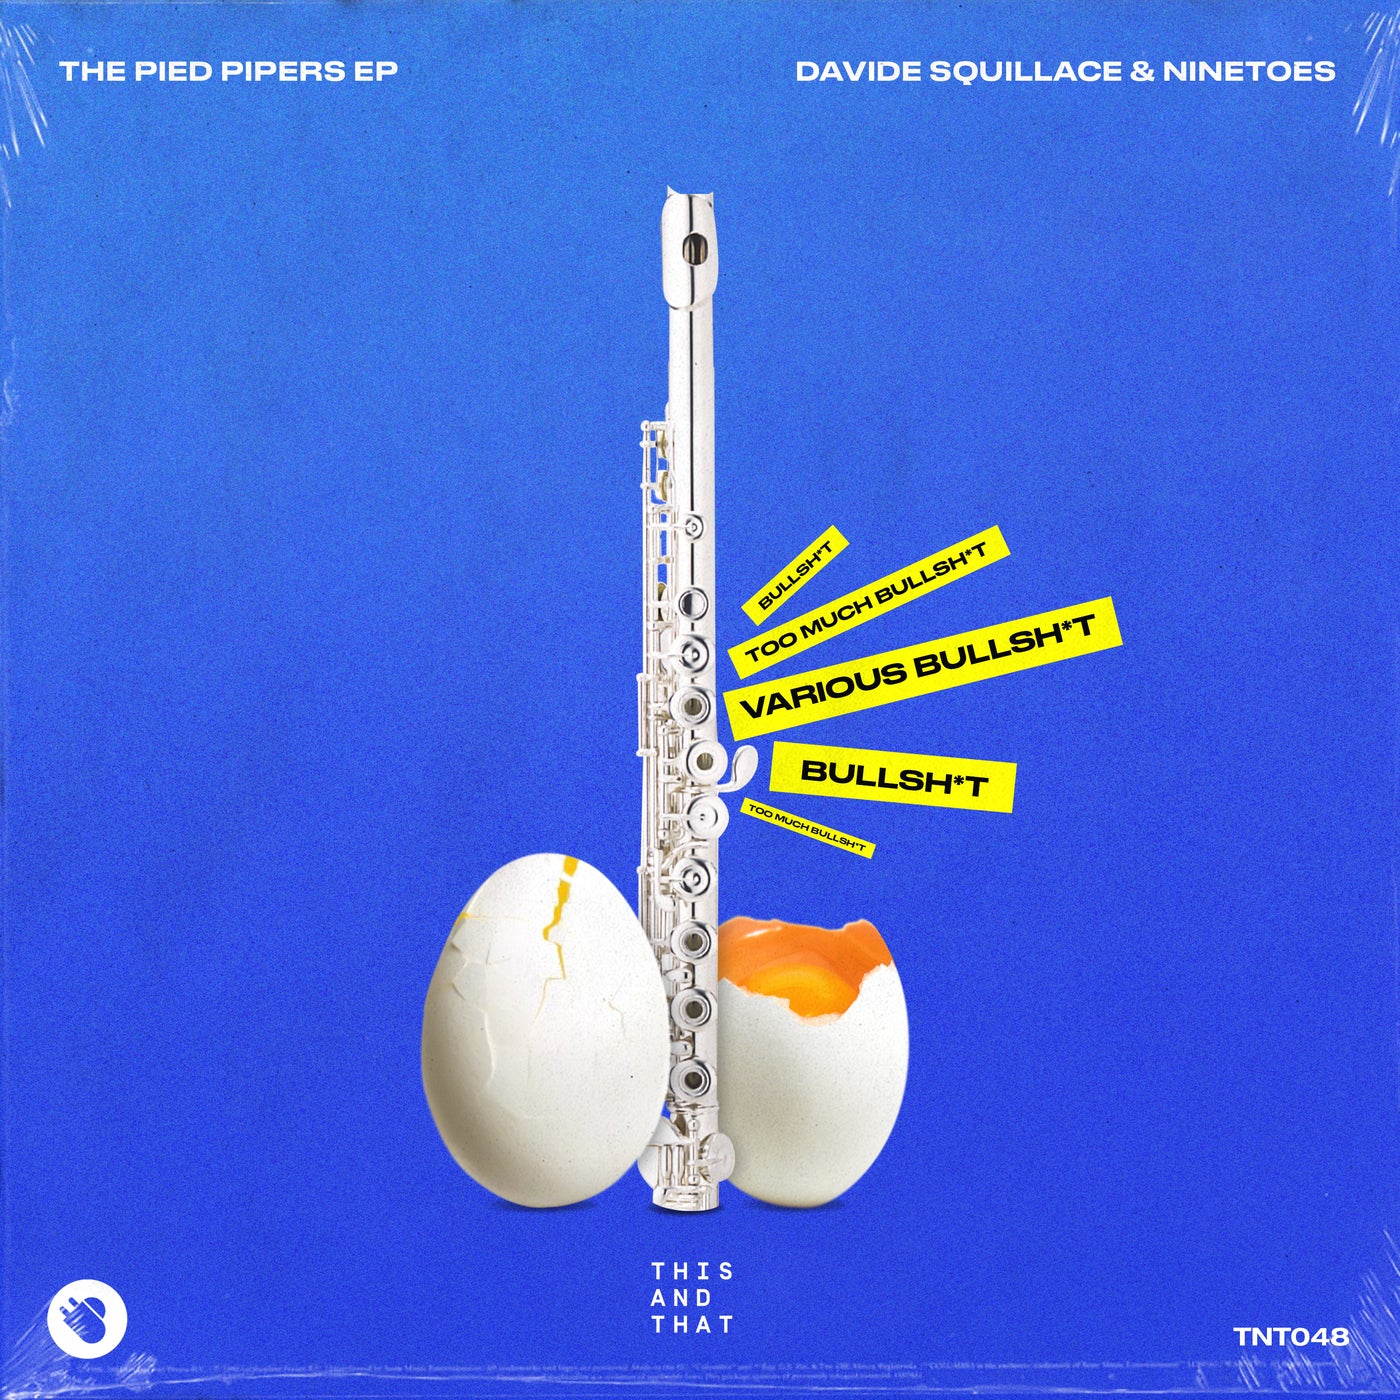 image cover: Davide Squillace, Ninetoes - The Pied Pipers EP / TNT048